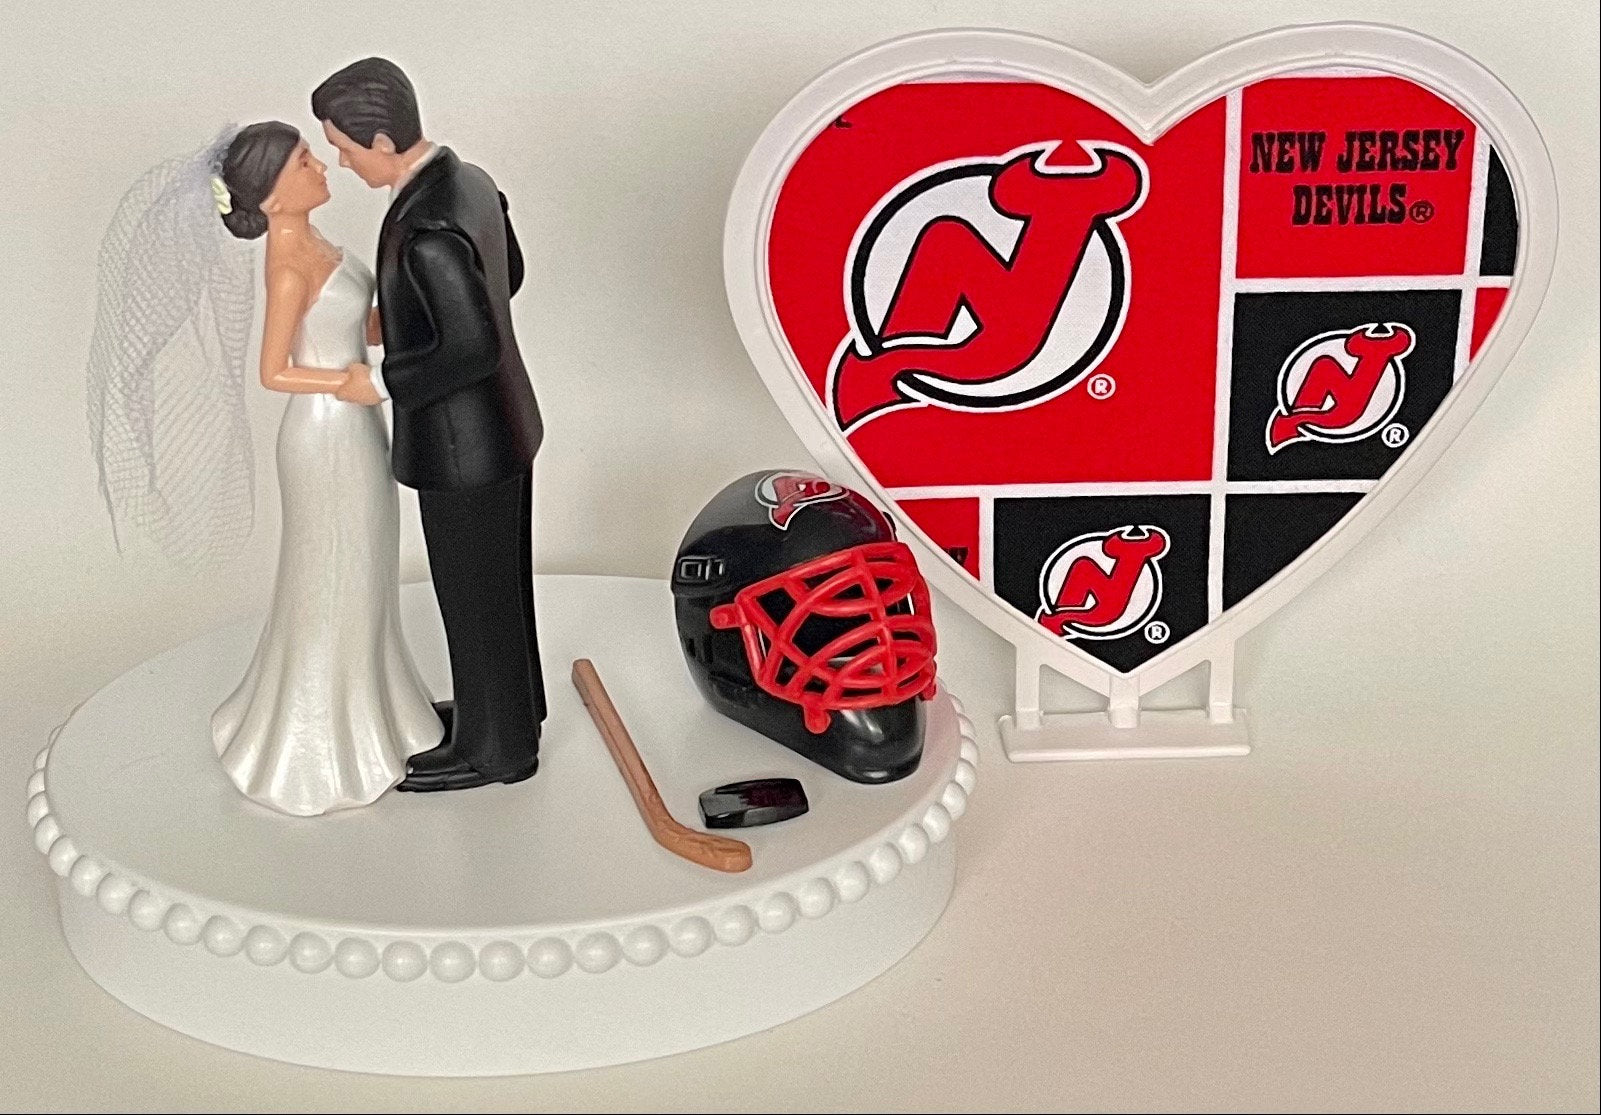 Wedding Cake Topper New Jersey Devils Hockey Themed Short-Haired Bride and Groom Beautiful Wedding Reception Shower Gift Item Sports Fan Fun